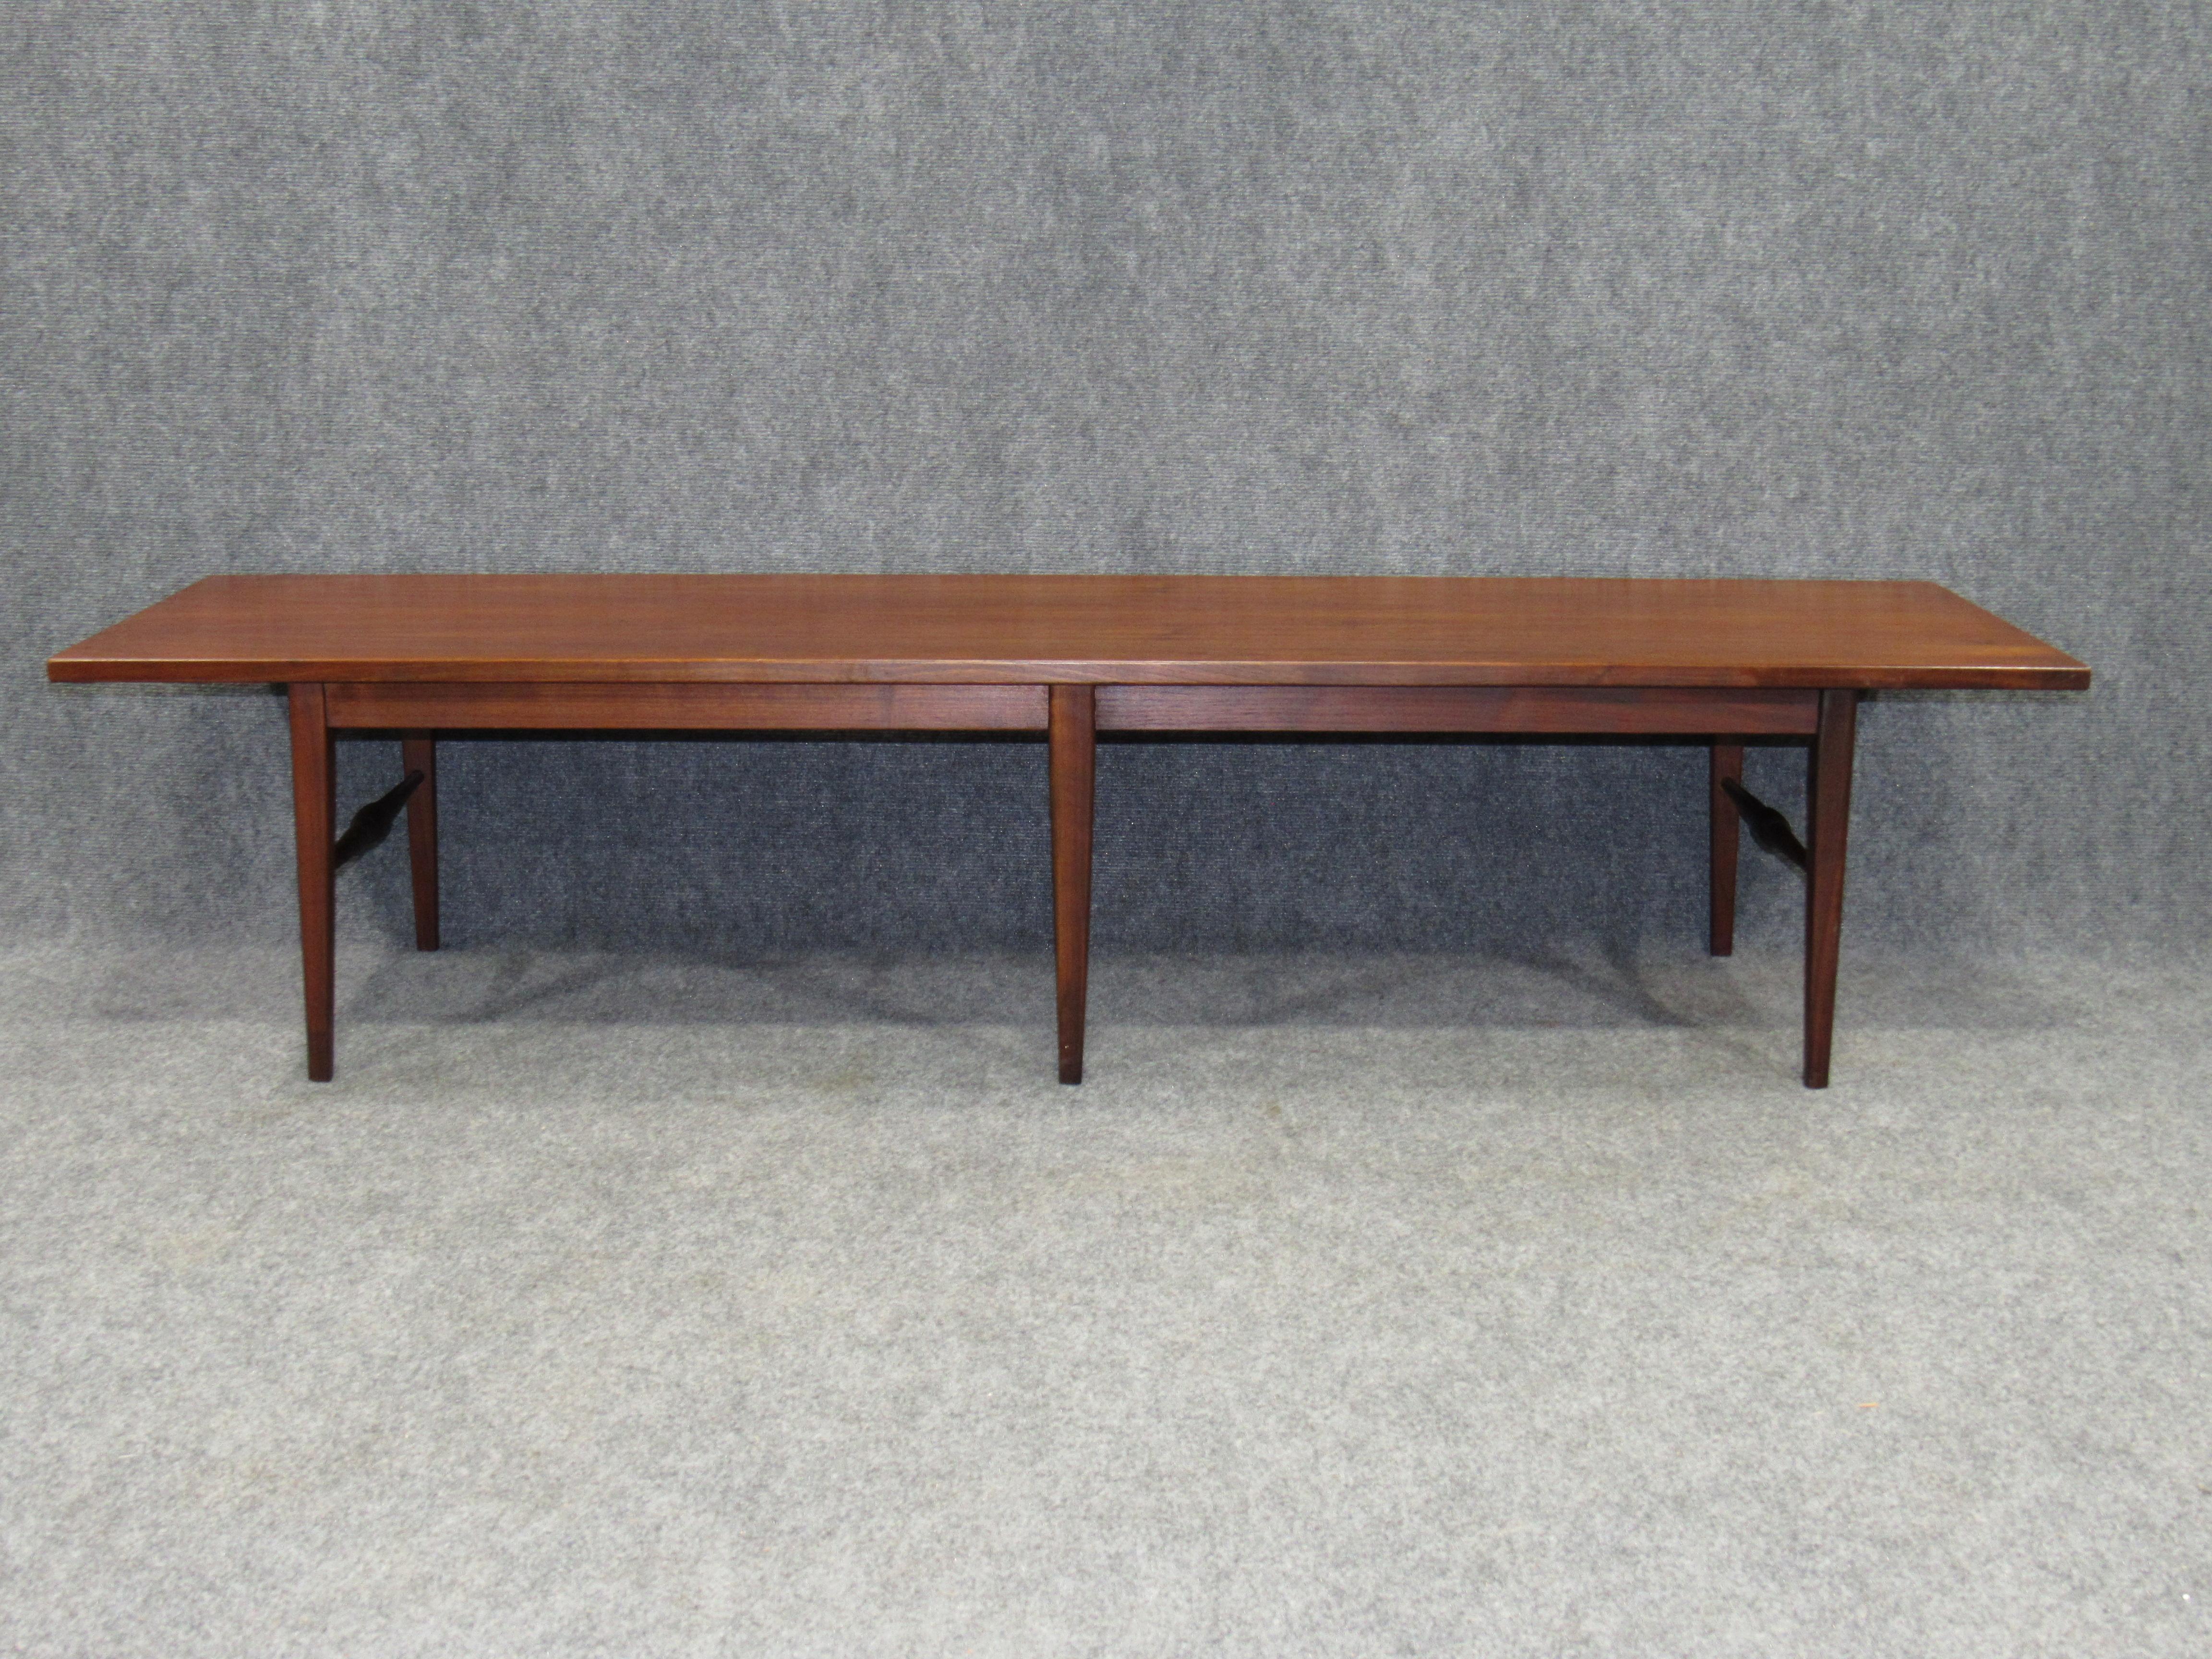 Danish modern six-legged rosewood coffee table. Excellent vintage condition.